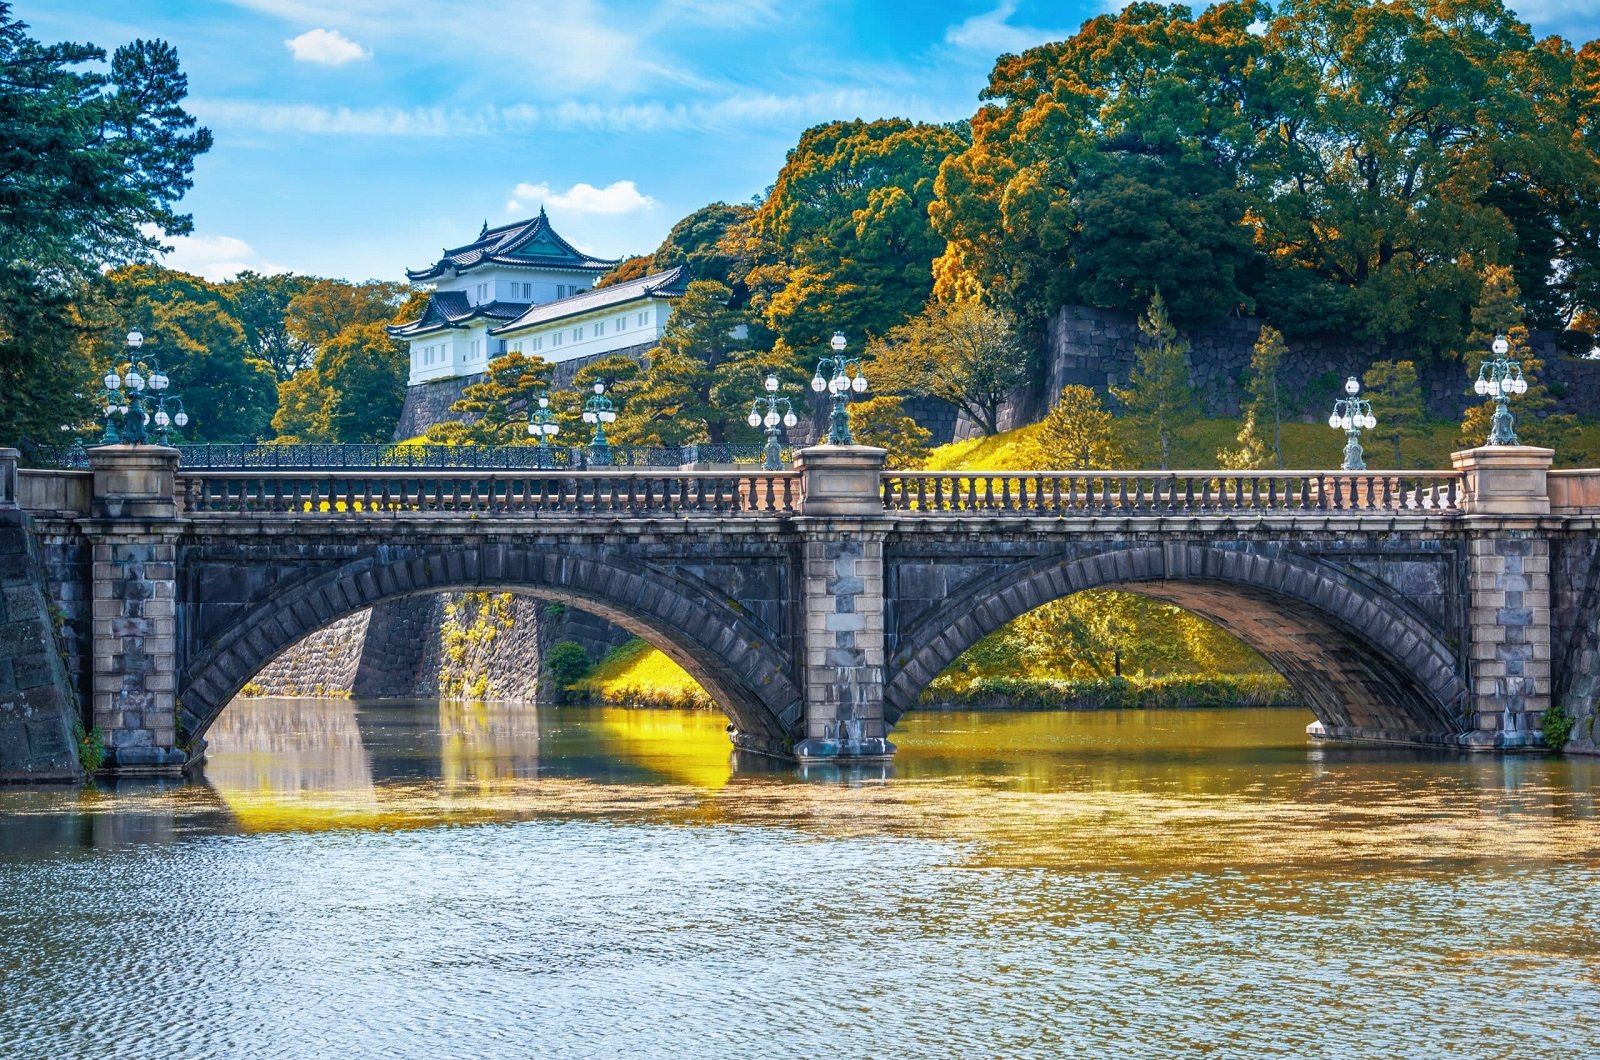 <p class="wp-caption-text">Image Credit: Shutterstock / Nuttawut Uttamaharad</p>  <p>Japan’s blend of the futuristic and the traditional creates a fascinating backdrop for IT experts, engineers, and English teachers. English teachers can earn between ¥2.5 million to ¥6 million annually in a country where respect and innovation walk hand in hand.</p>